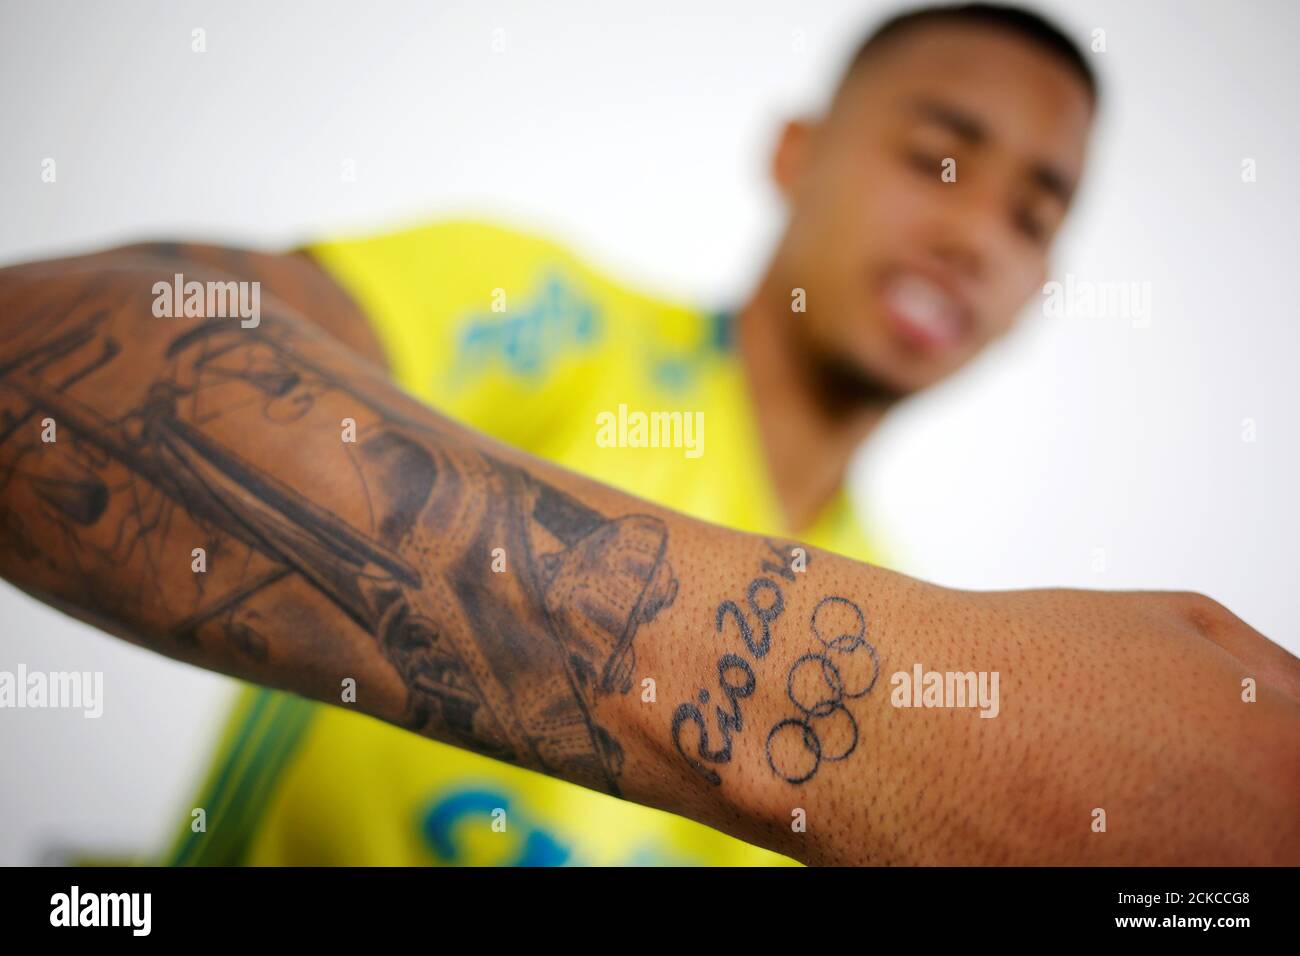 Palmeiras Gabriel Jesus 19 Shows His Tattoo Designed In Reference To His Olympic Gold Medal During An Interview With Reuters In Sao Paulo Brazil November 24 16 Reuters Nacho Doce Stock Photo Alamy